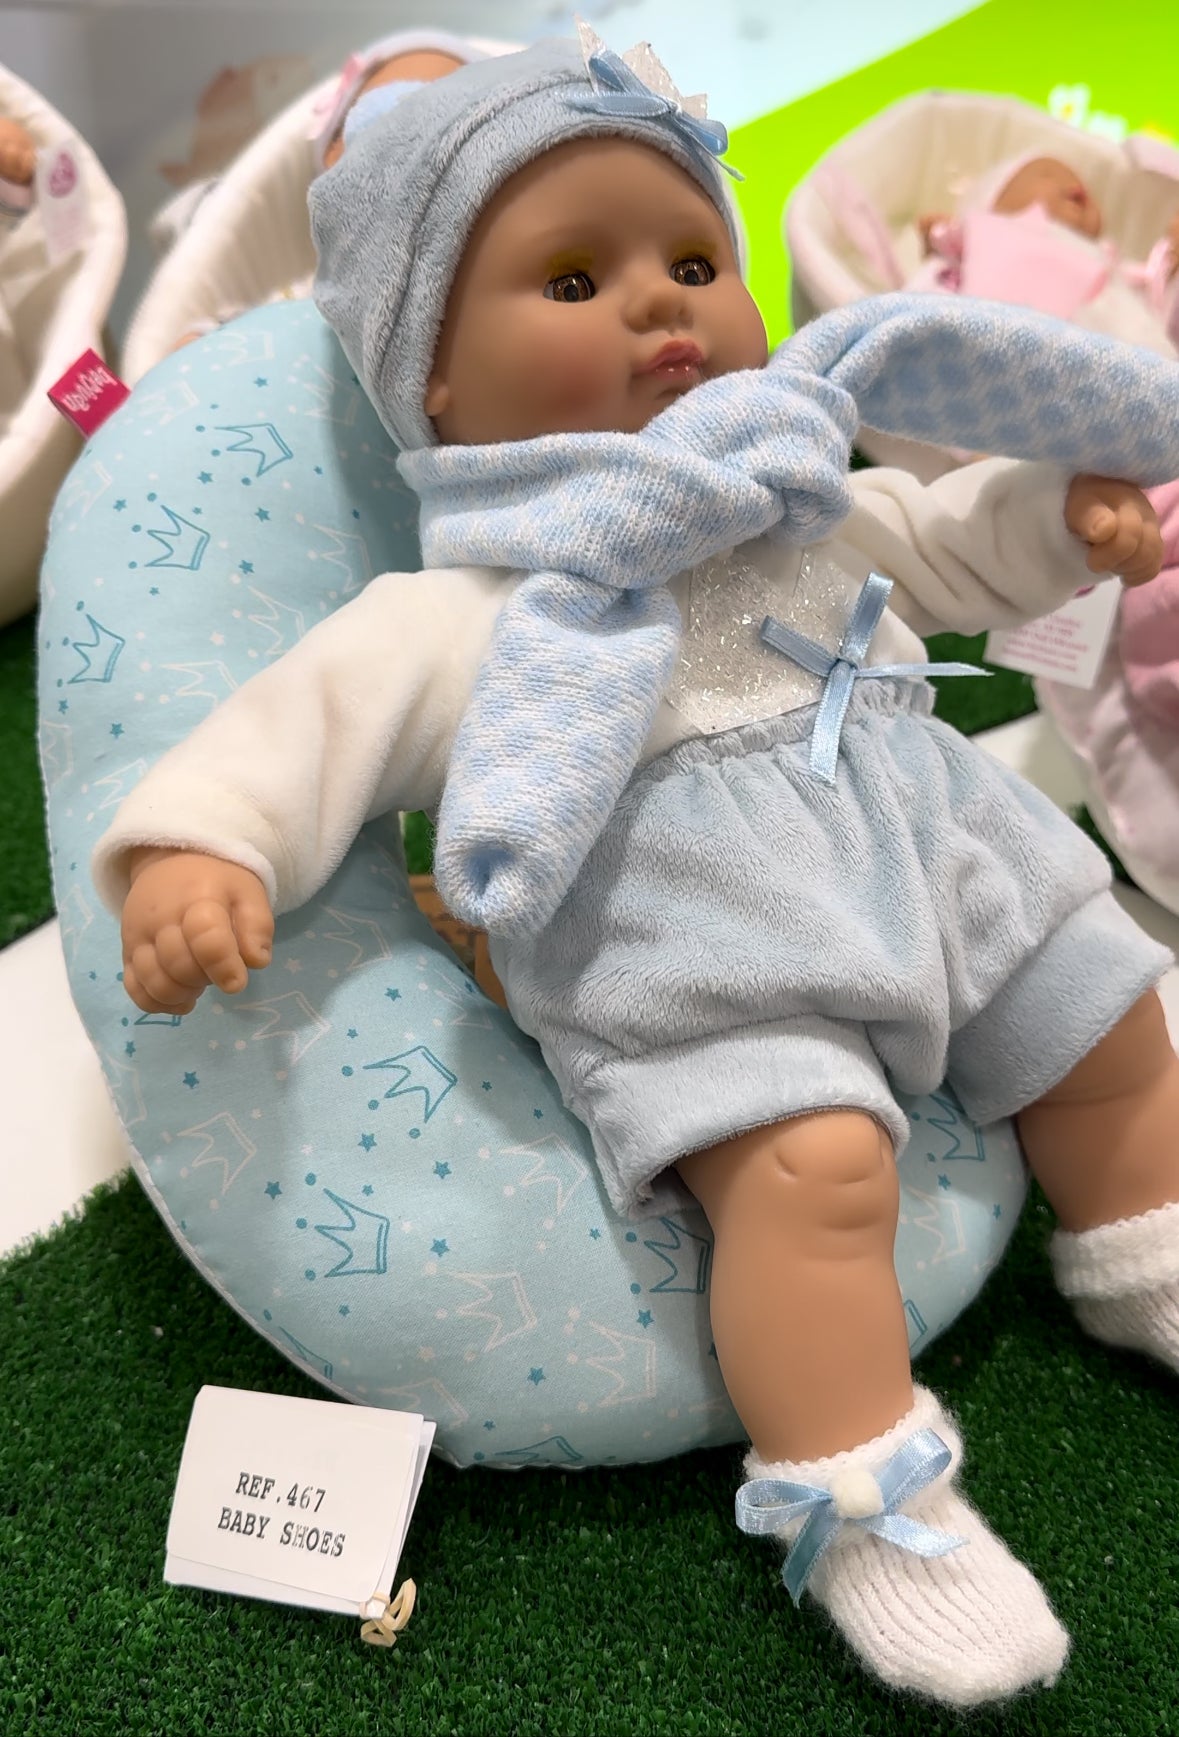 0467 Baby Blue Crying Doll